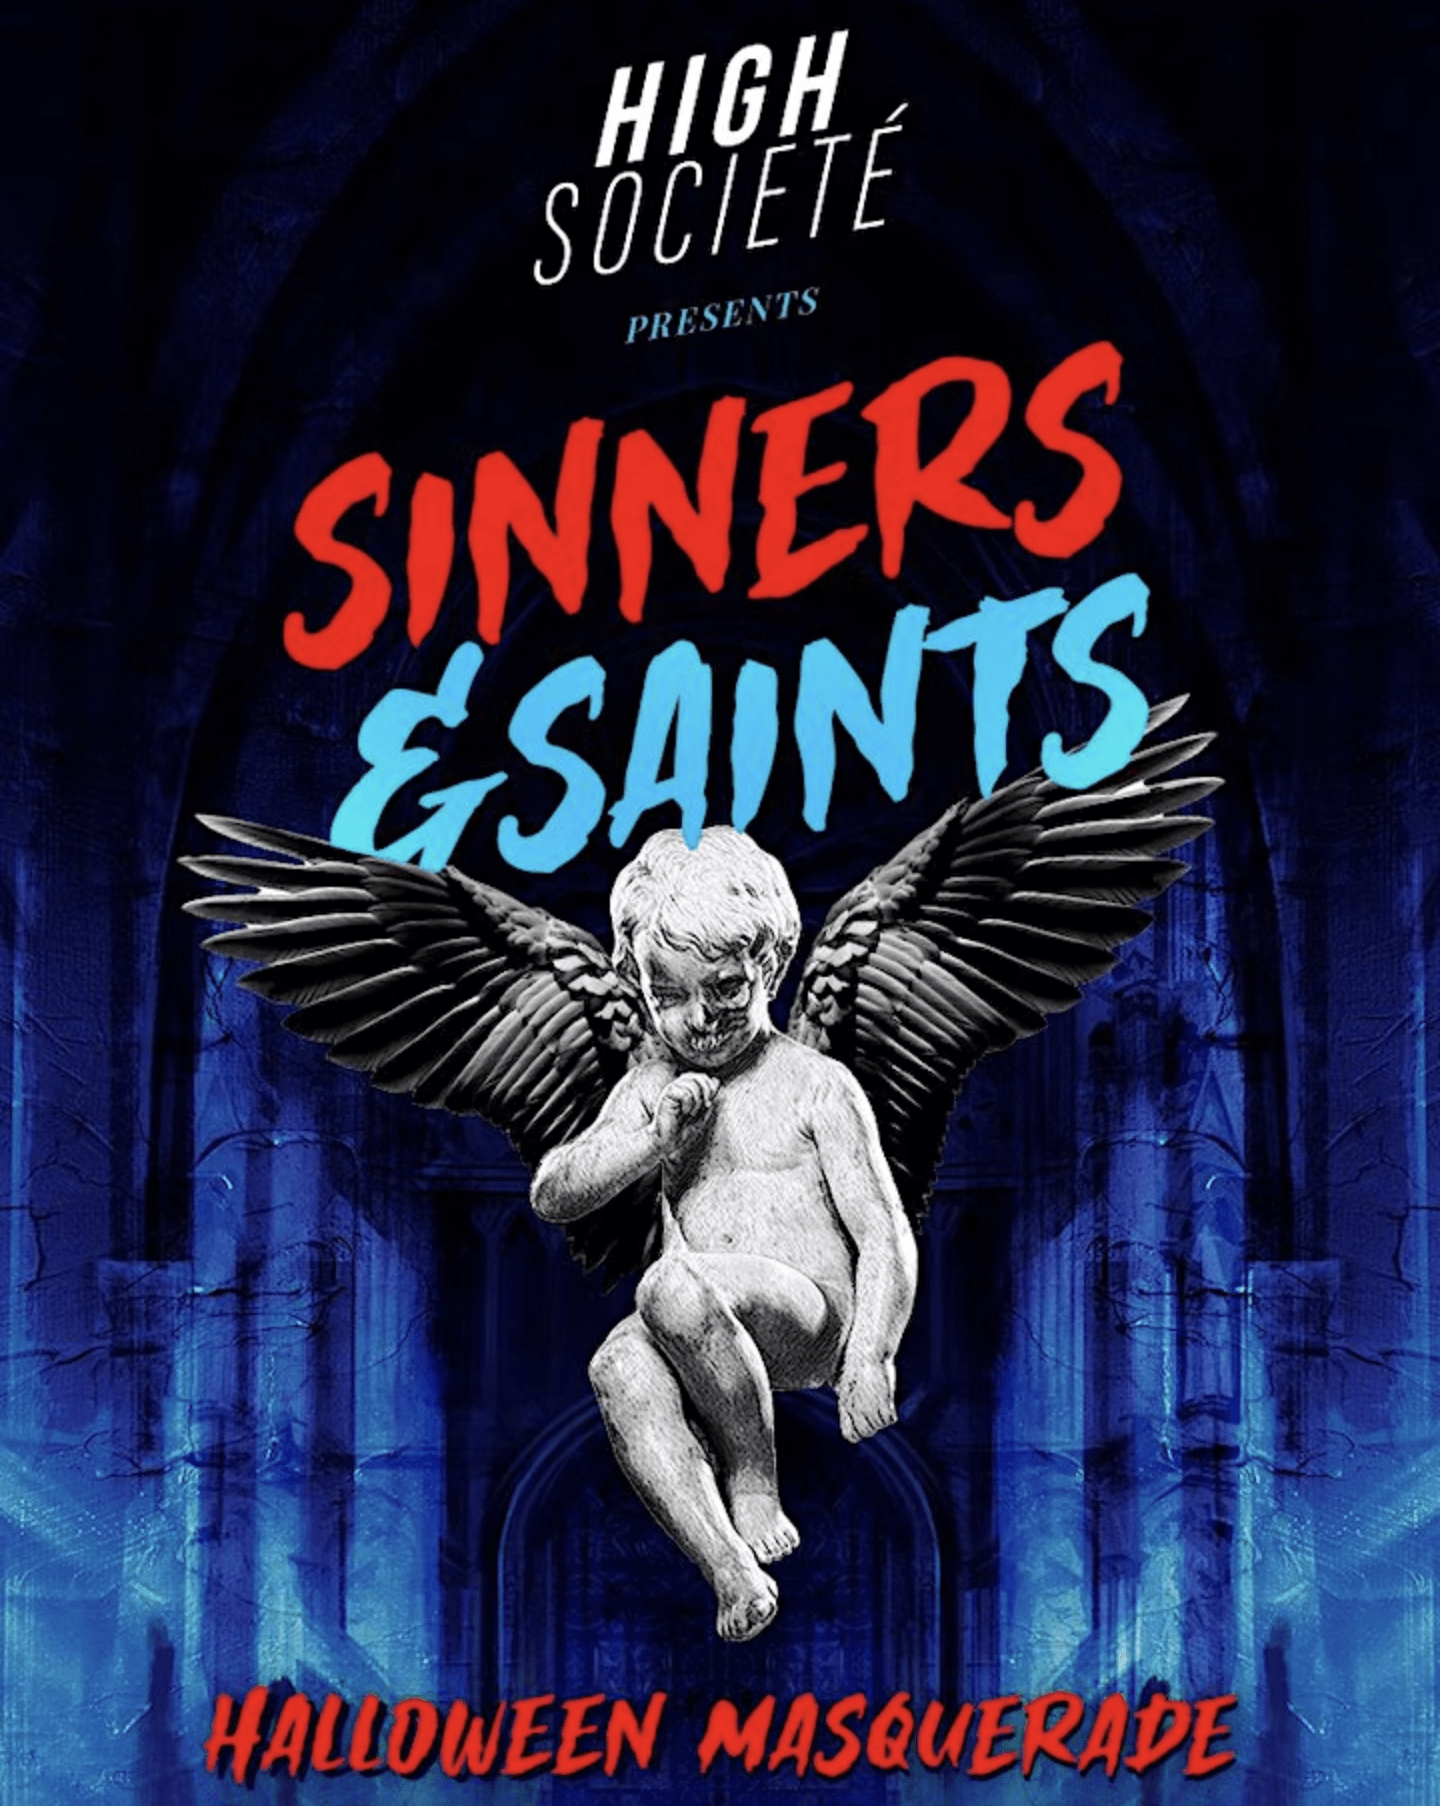 picture of a white angel baby statute with the title "Sinners & Saints